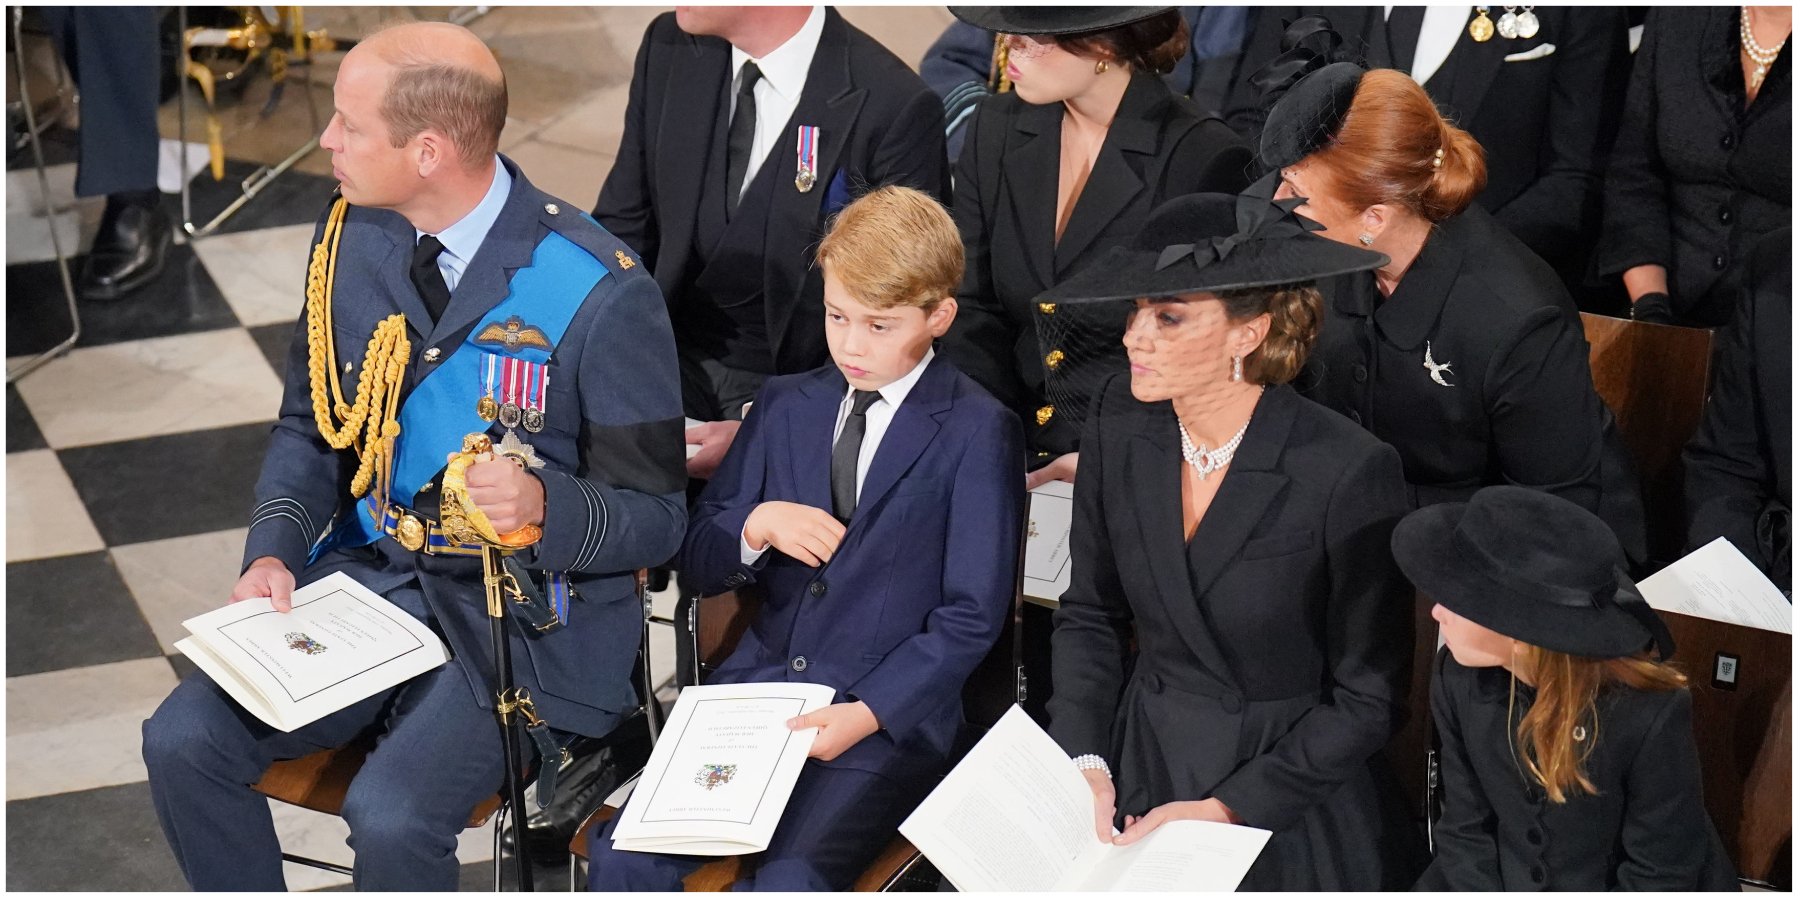 Prince William, Prince George, Kate Middleton, and Princess Charlotte at the funeral of Queen Elizabeth in 2022.